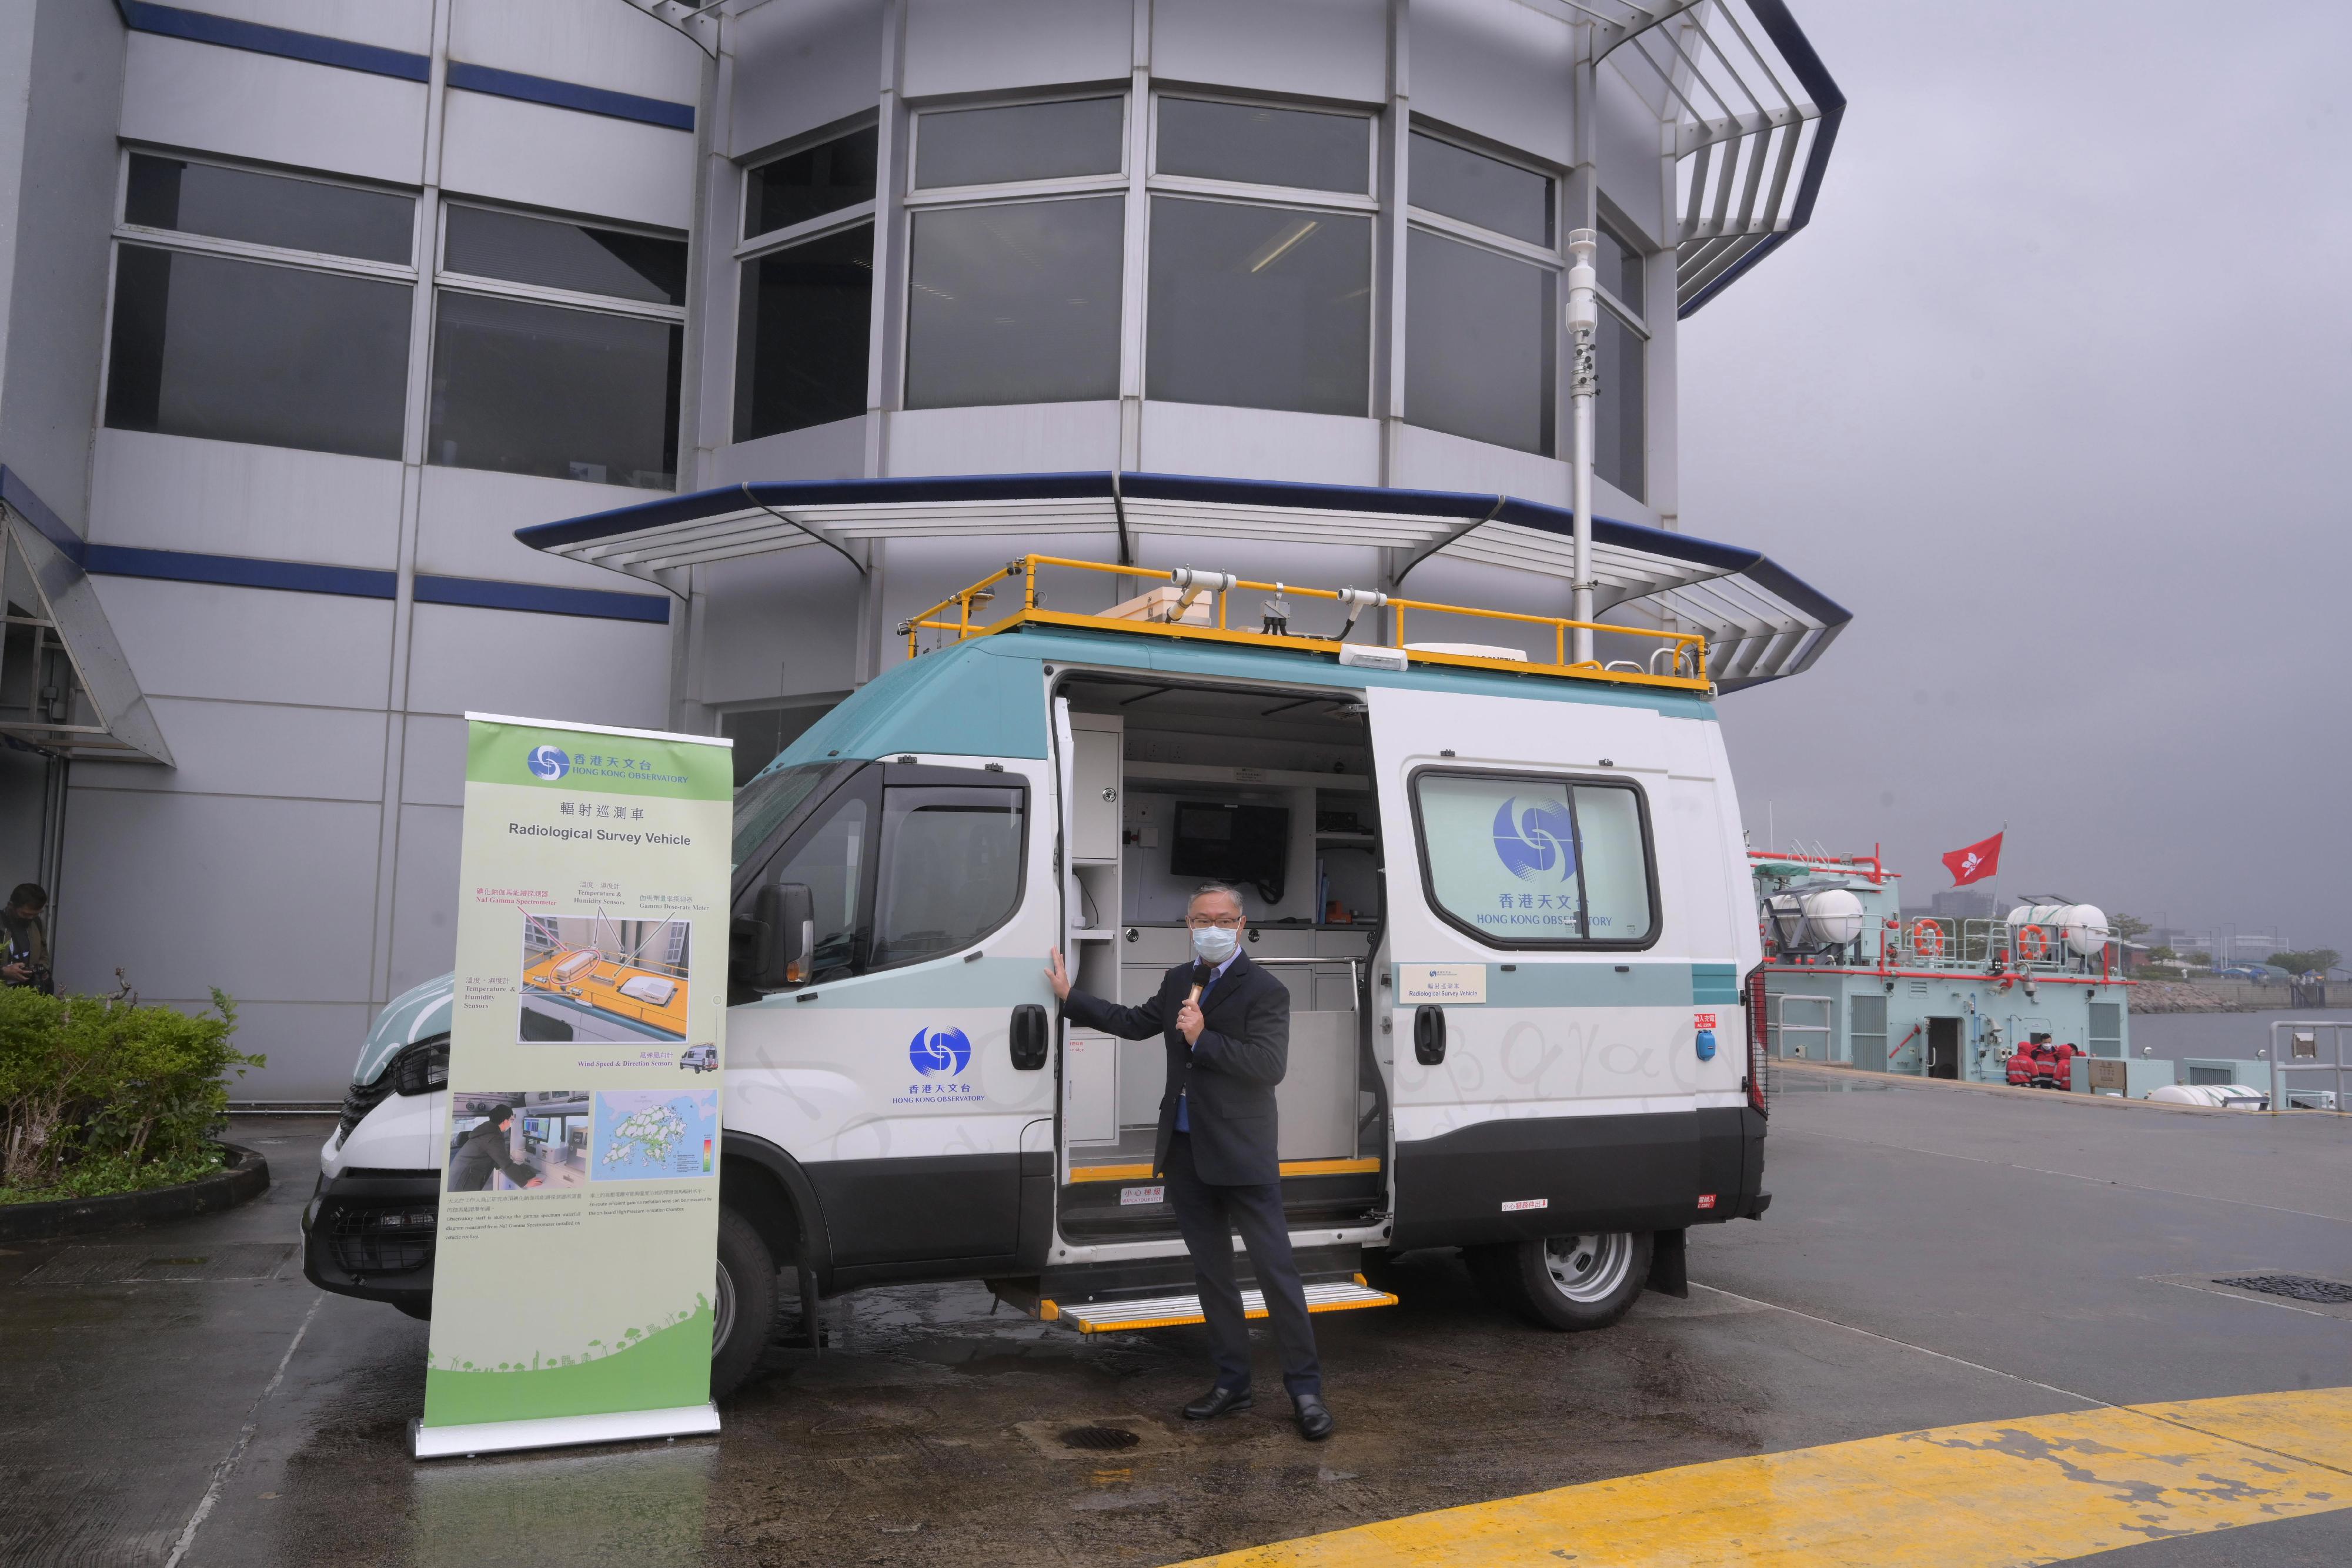 The Government conducted an inter-departmental exercise, "Checkerboard III", today (January 12). Photo shows the Hong Kong Observatory deploying radiological survey vehicles to collect samples for emergency radiological surveys and radiation data collection.